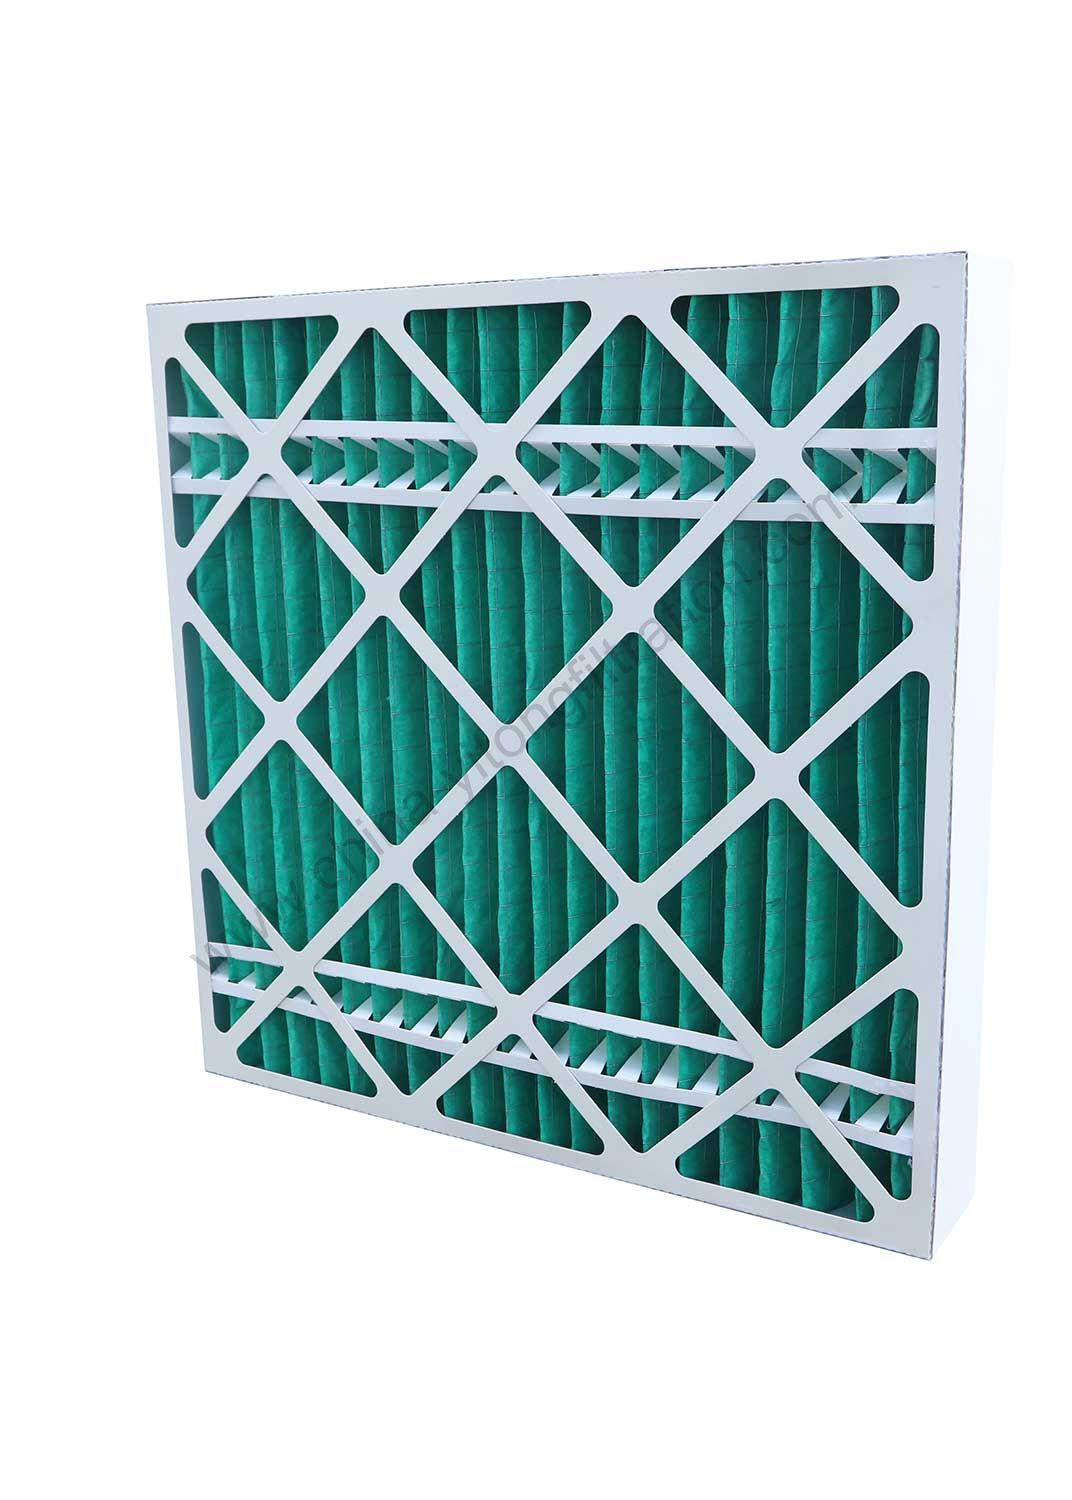 Primary Covered Mesh Plate Filter